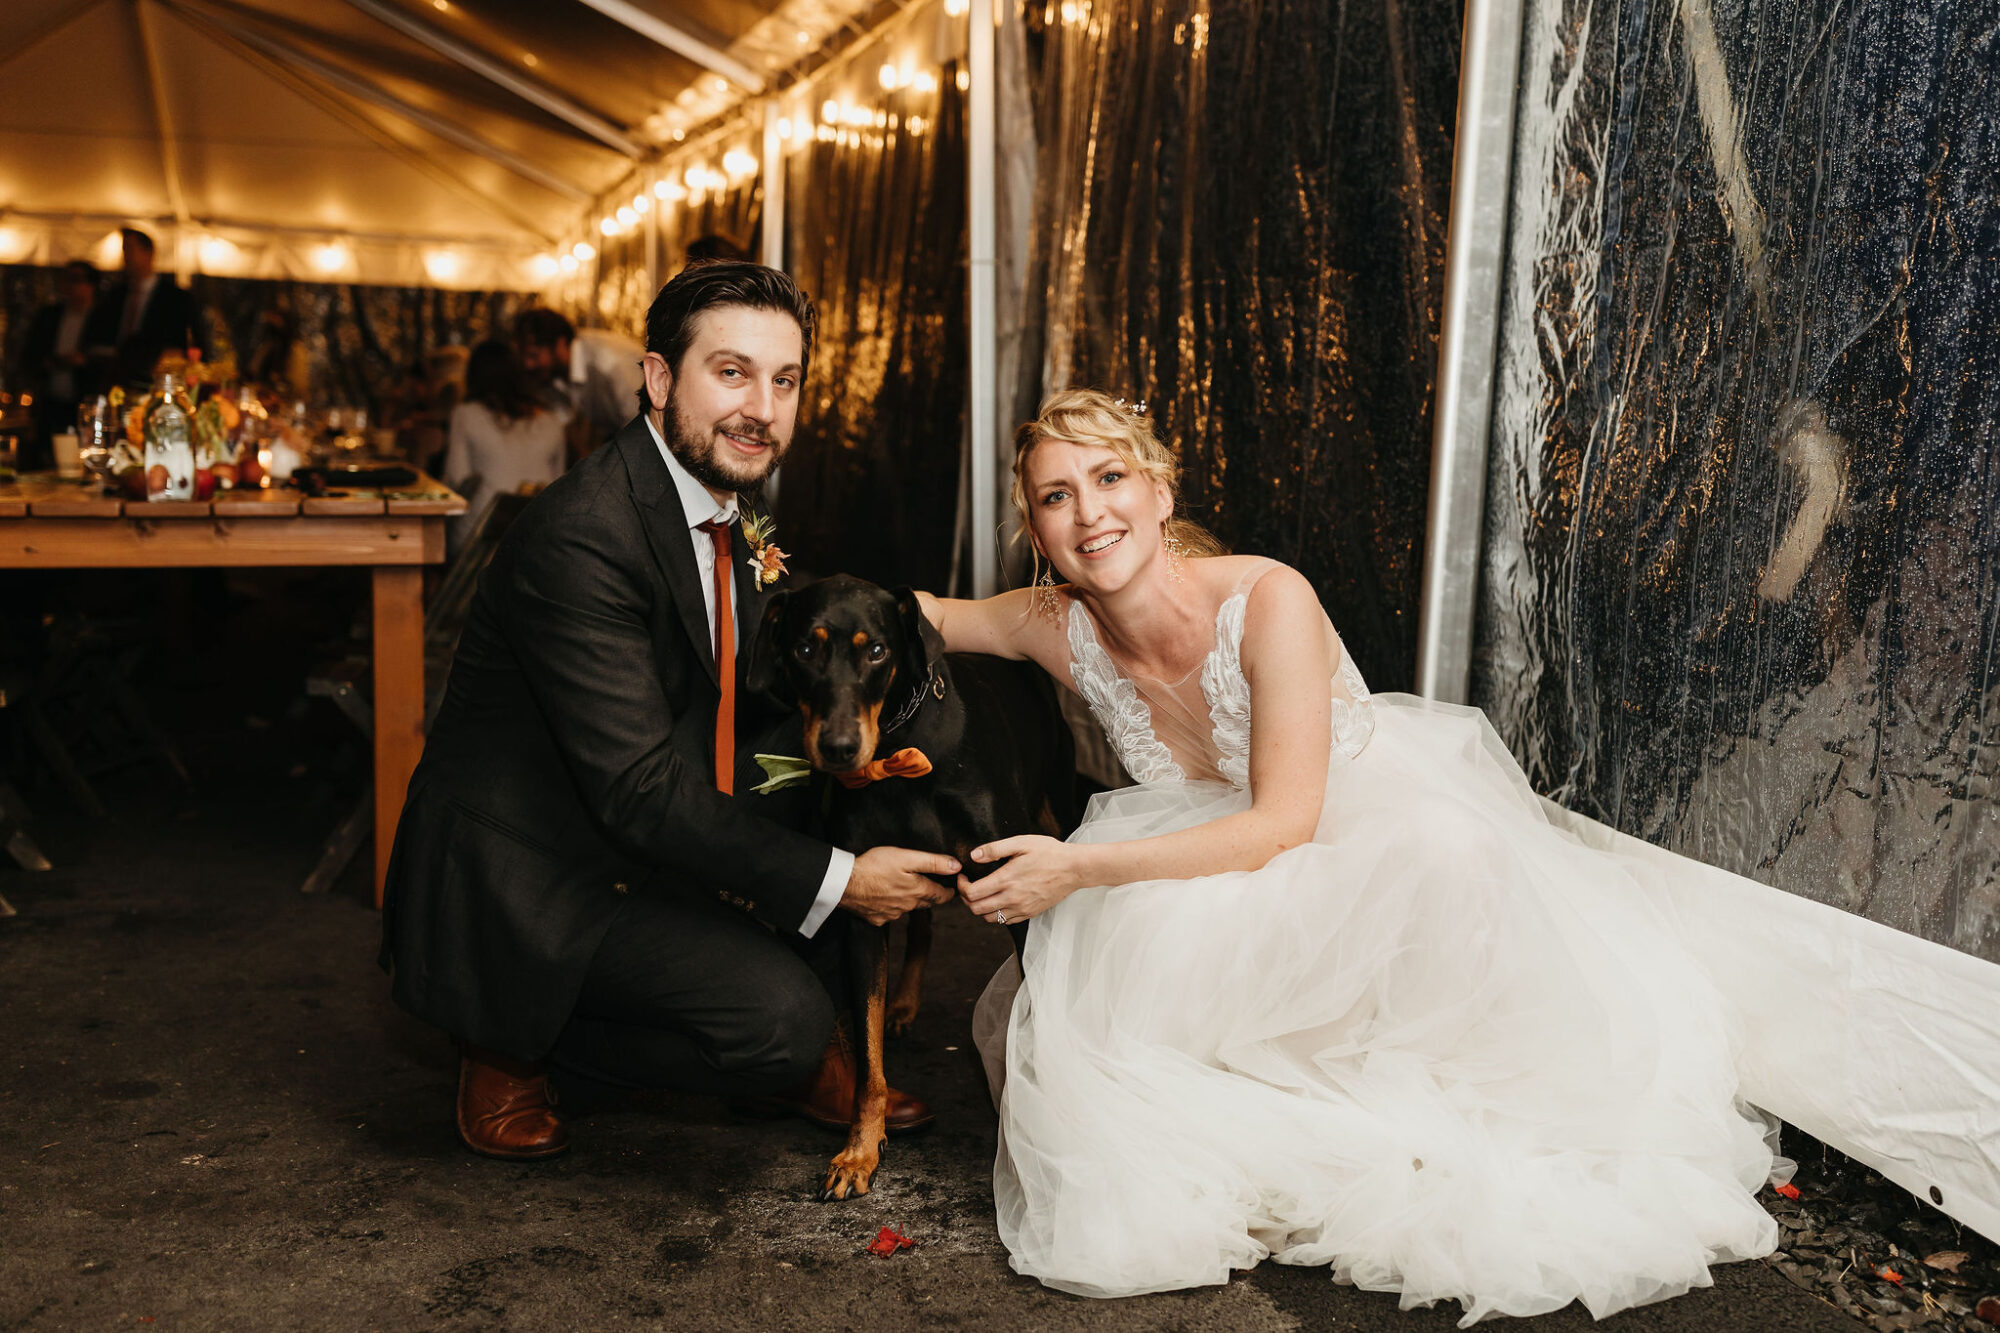 foxfire mountain house, catskill mountains, wedding, fall, fall florals, couple, flash photography, dogs at weddings